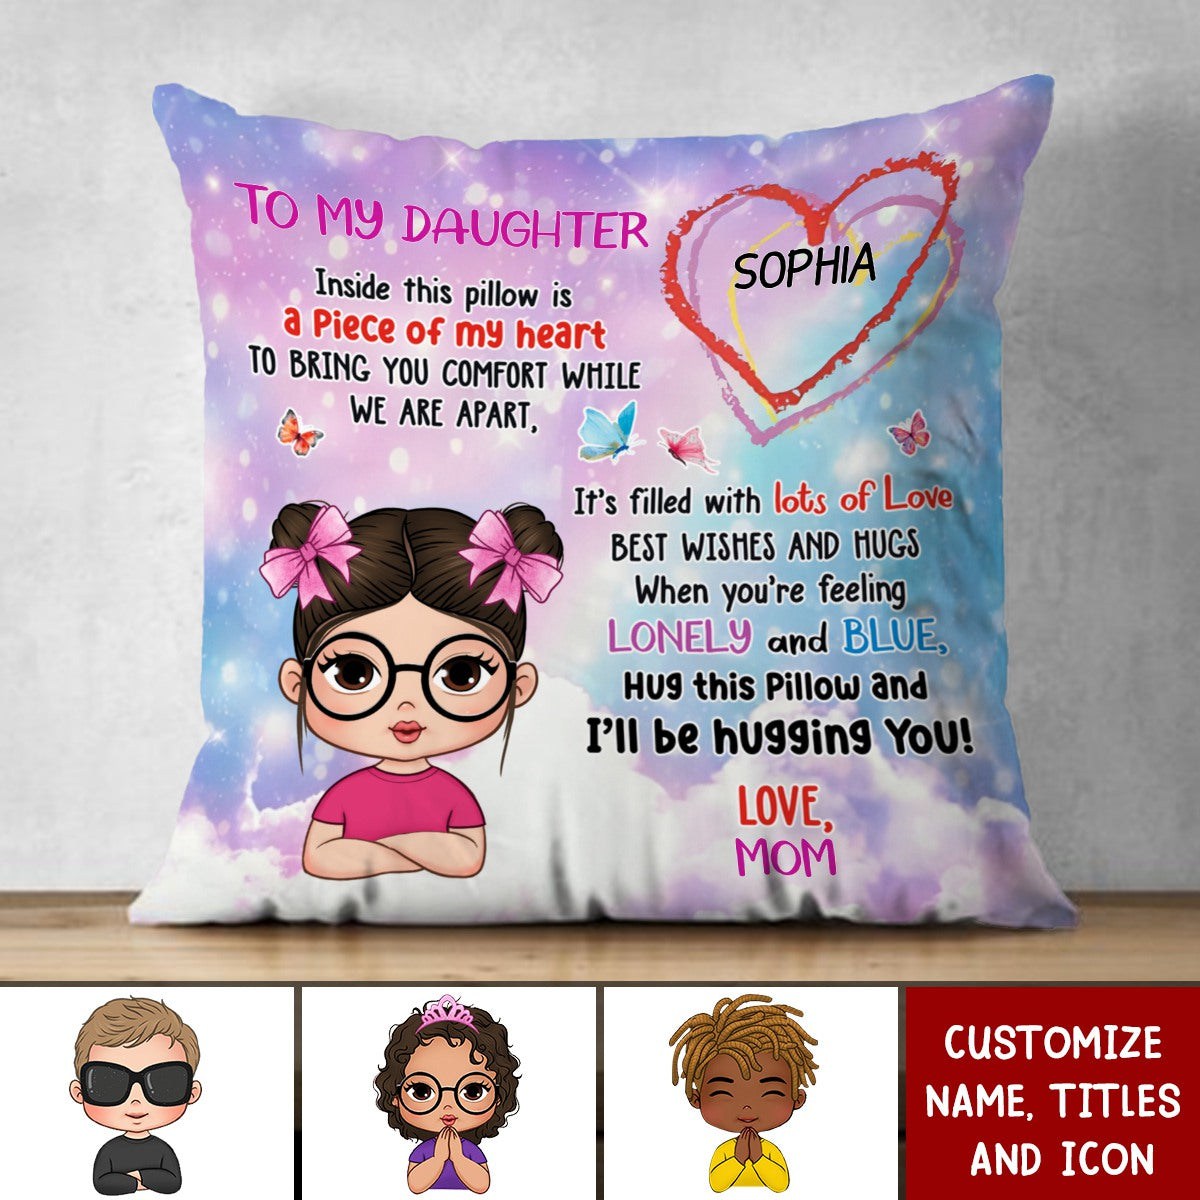 Hug This Pillow And I'll Be Hugging You - Personalized Pillow